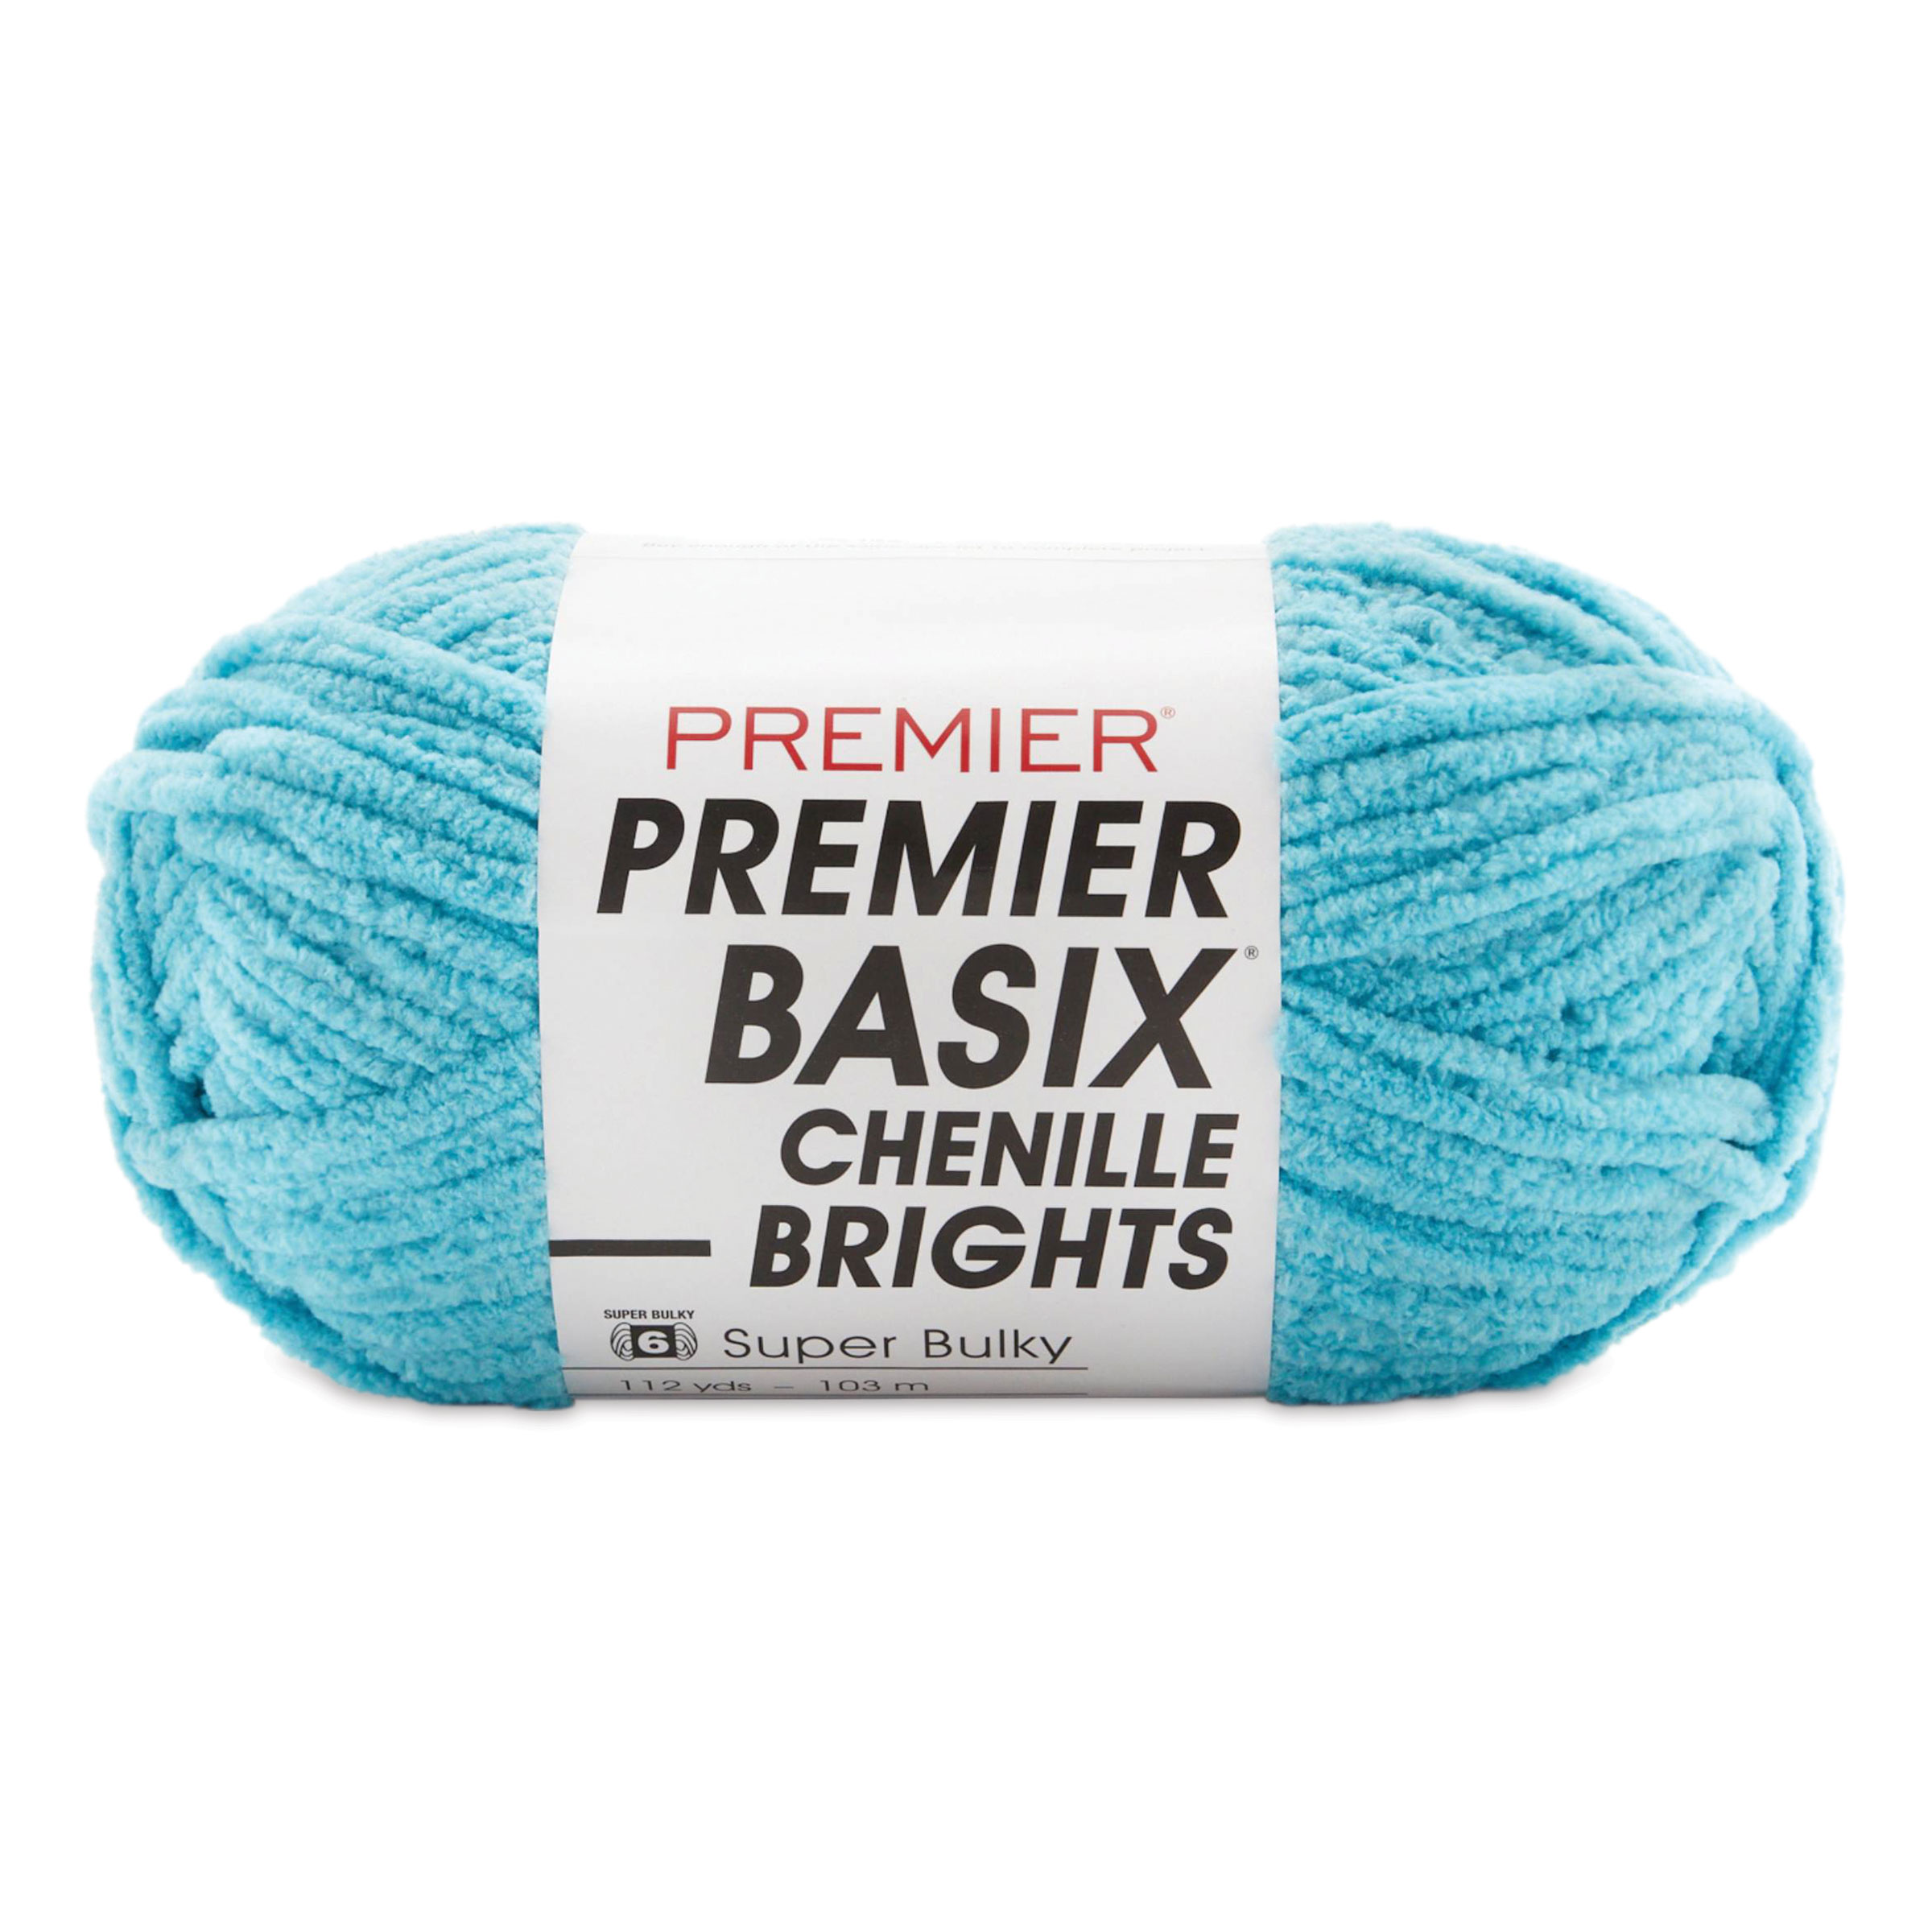 Premier Yarns on Instagram: Just arrived: New Premier Basix Chenille  Brights! Now in a 150g ball with 28 colors for all your crafting needs.  #makeitpremier #premieryarns #premierbasix